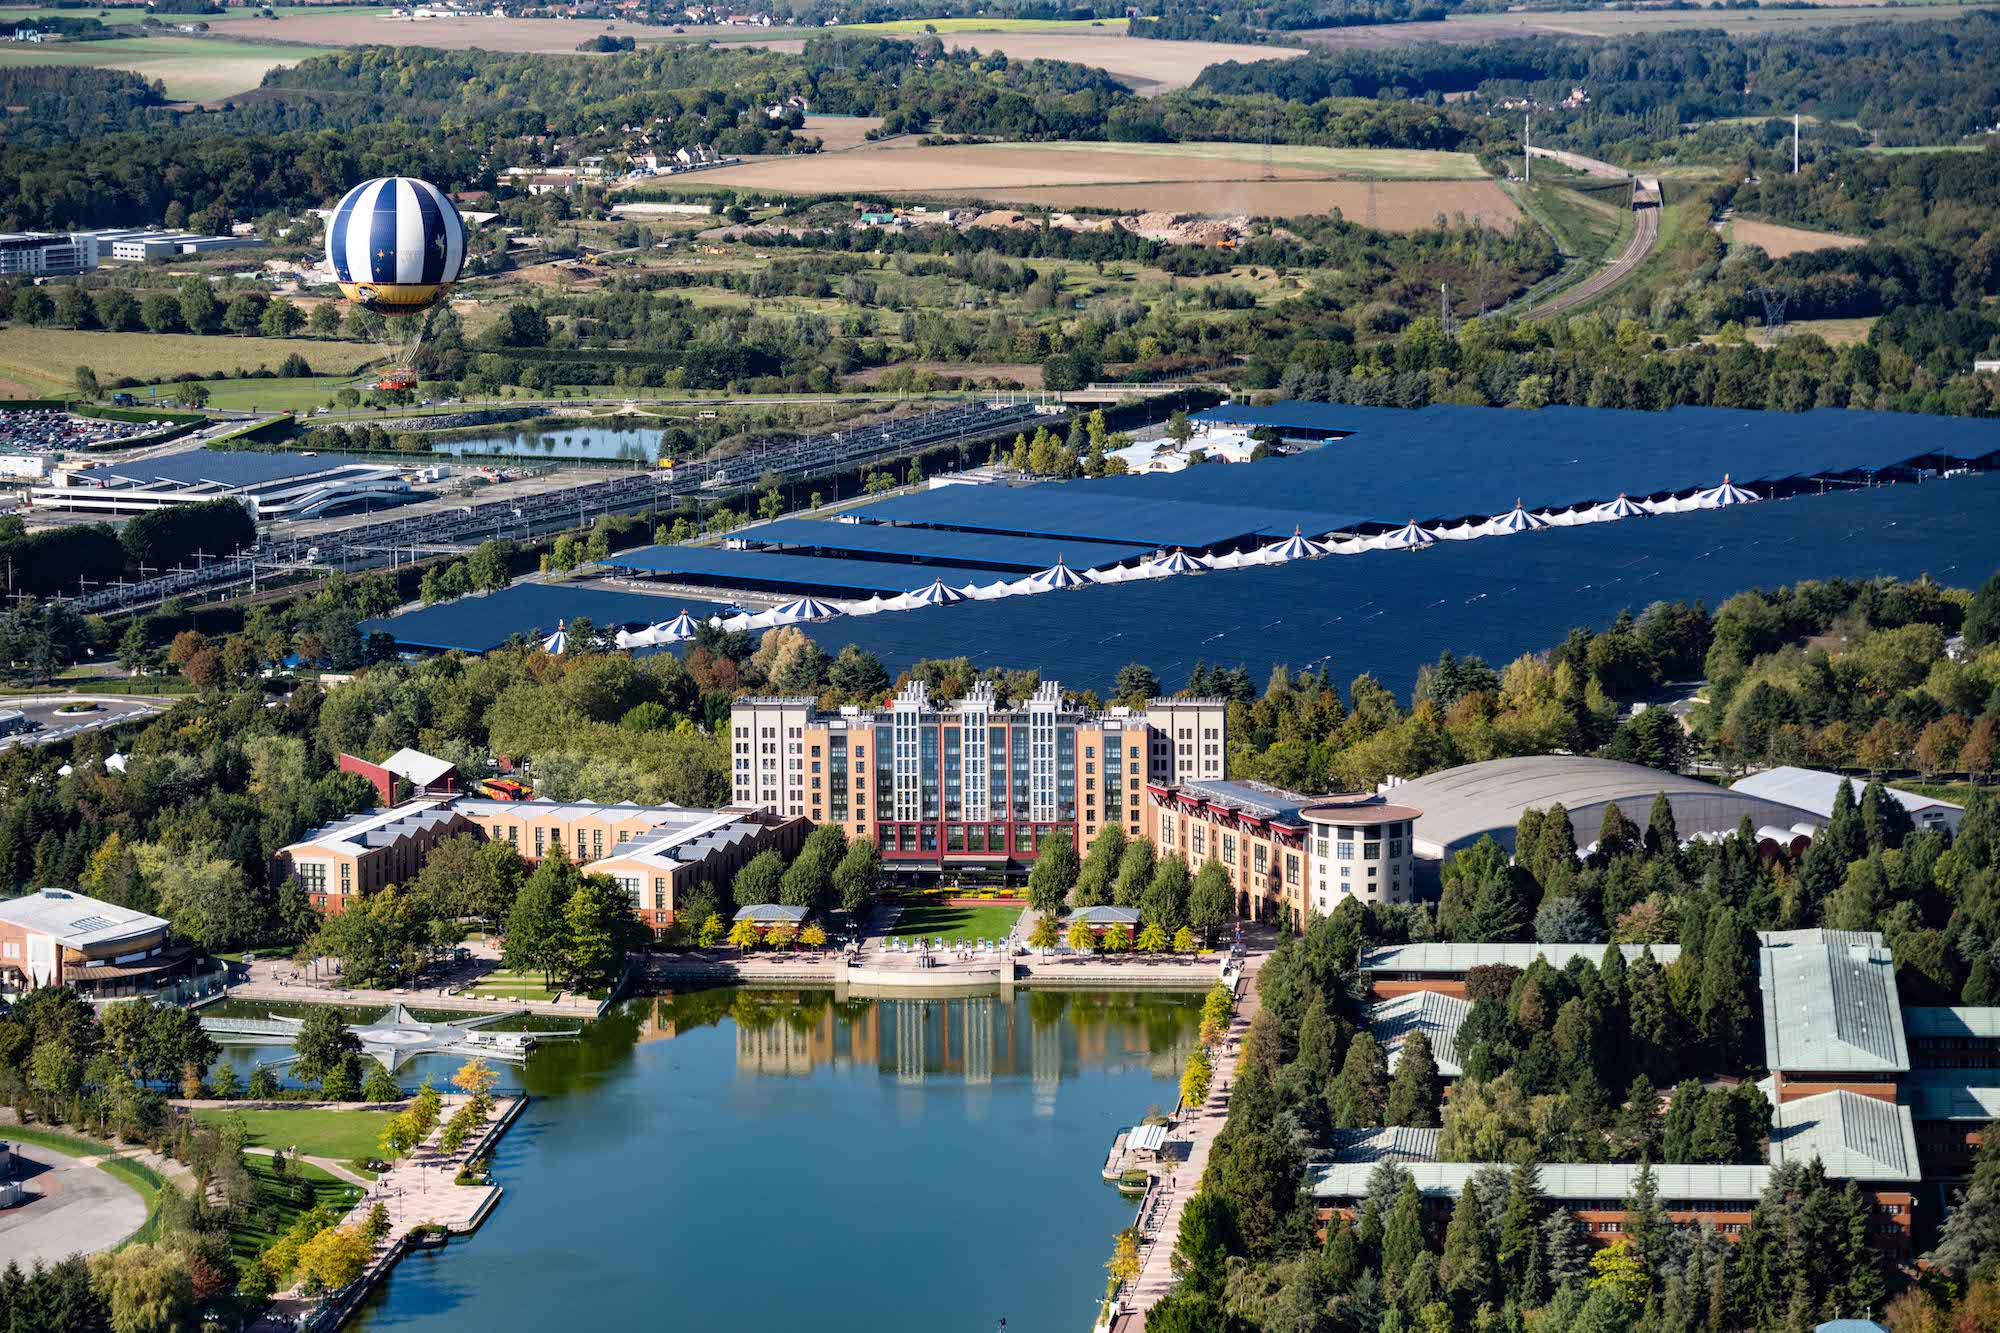 After Building Europe’s Largest Solar Canopy Plant, Disneyland Paris Announces New Thermo-Refrigerating Pump to Further Reduce Carbon Emissions